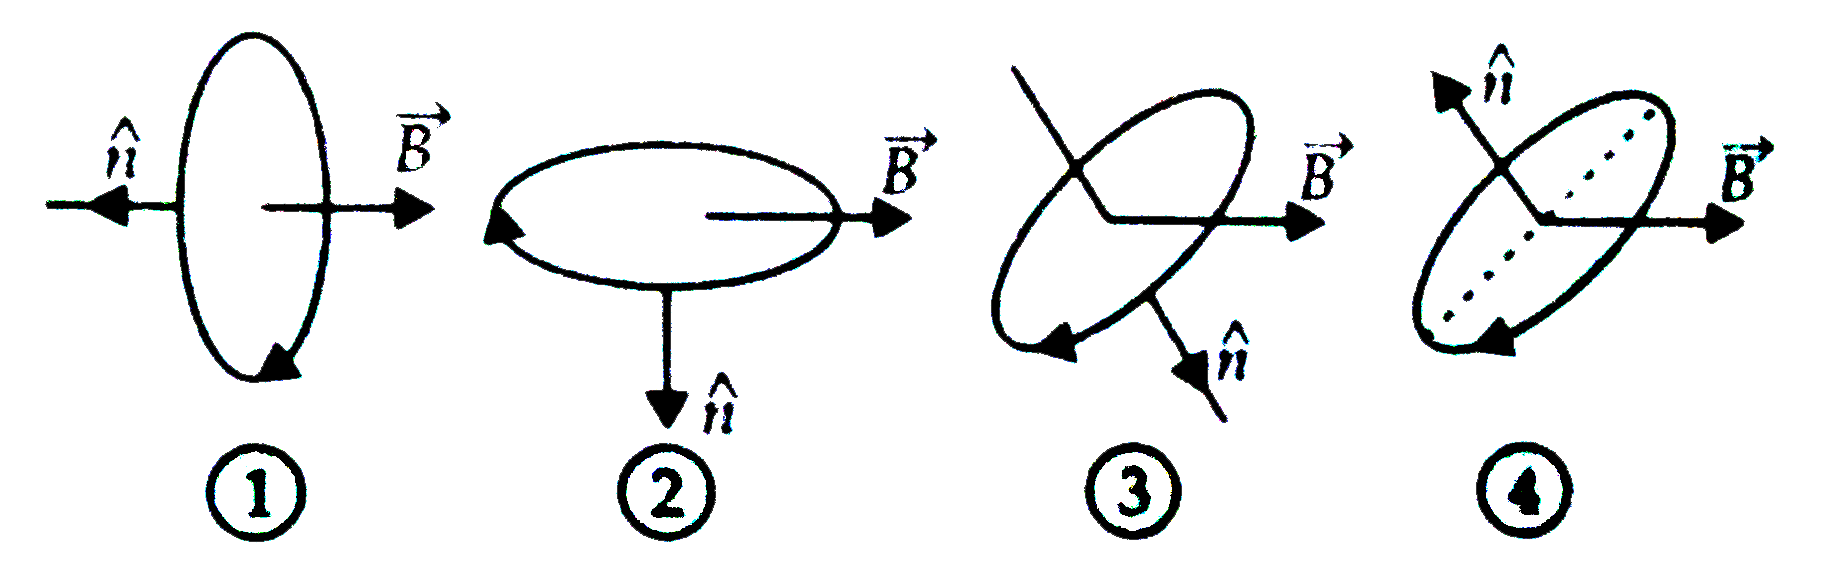 A current carrying loop is placed in a uniform magnetic field in four different orientations as shown in figure. Arrange them in the decreasing order of potential energy.